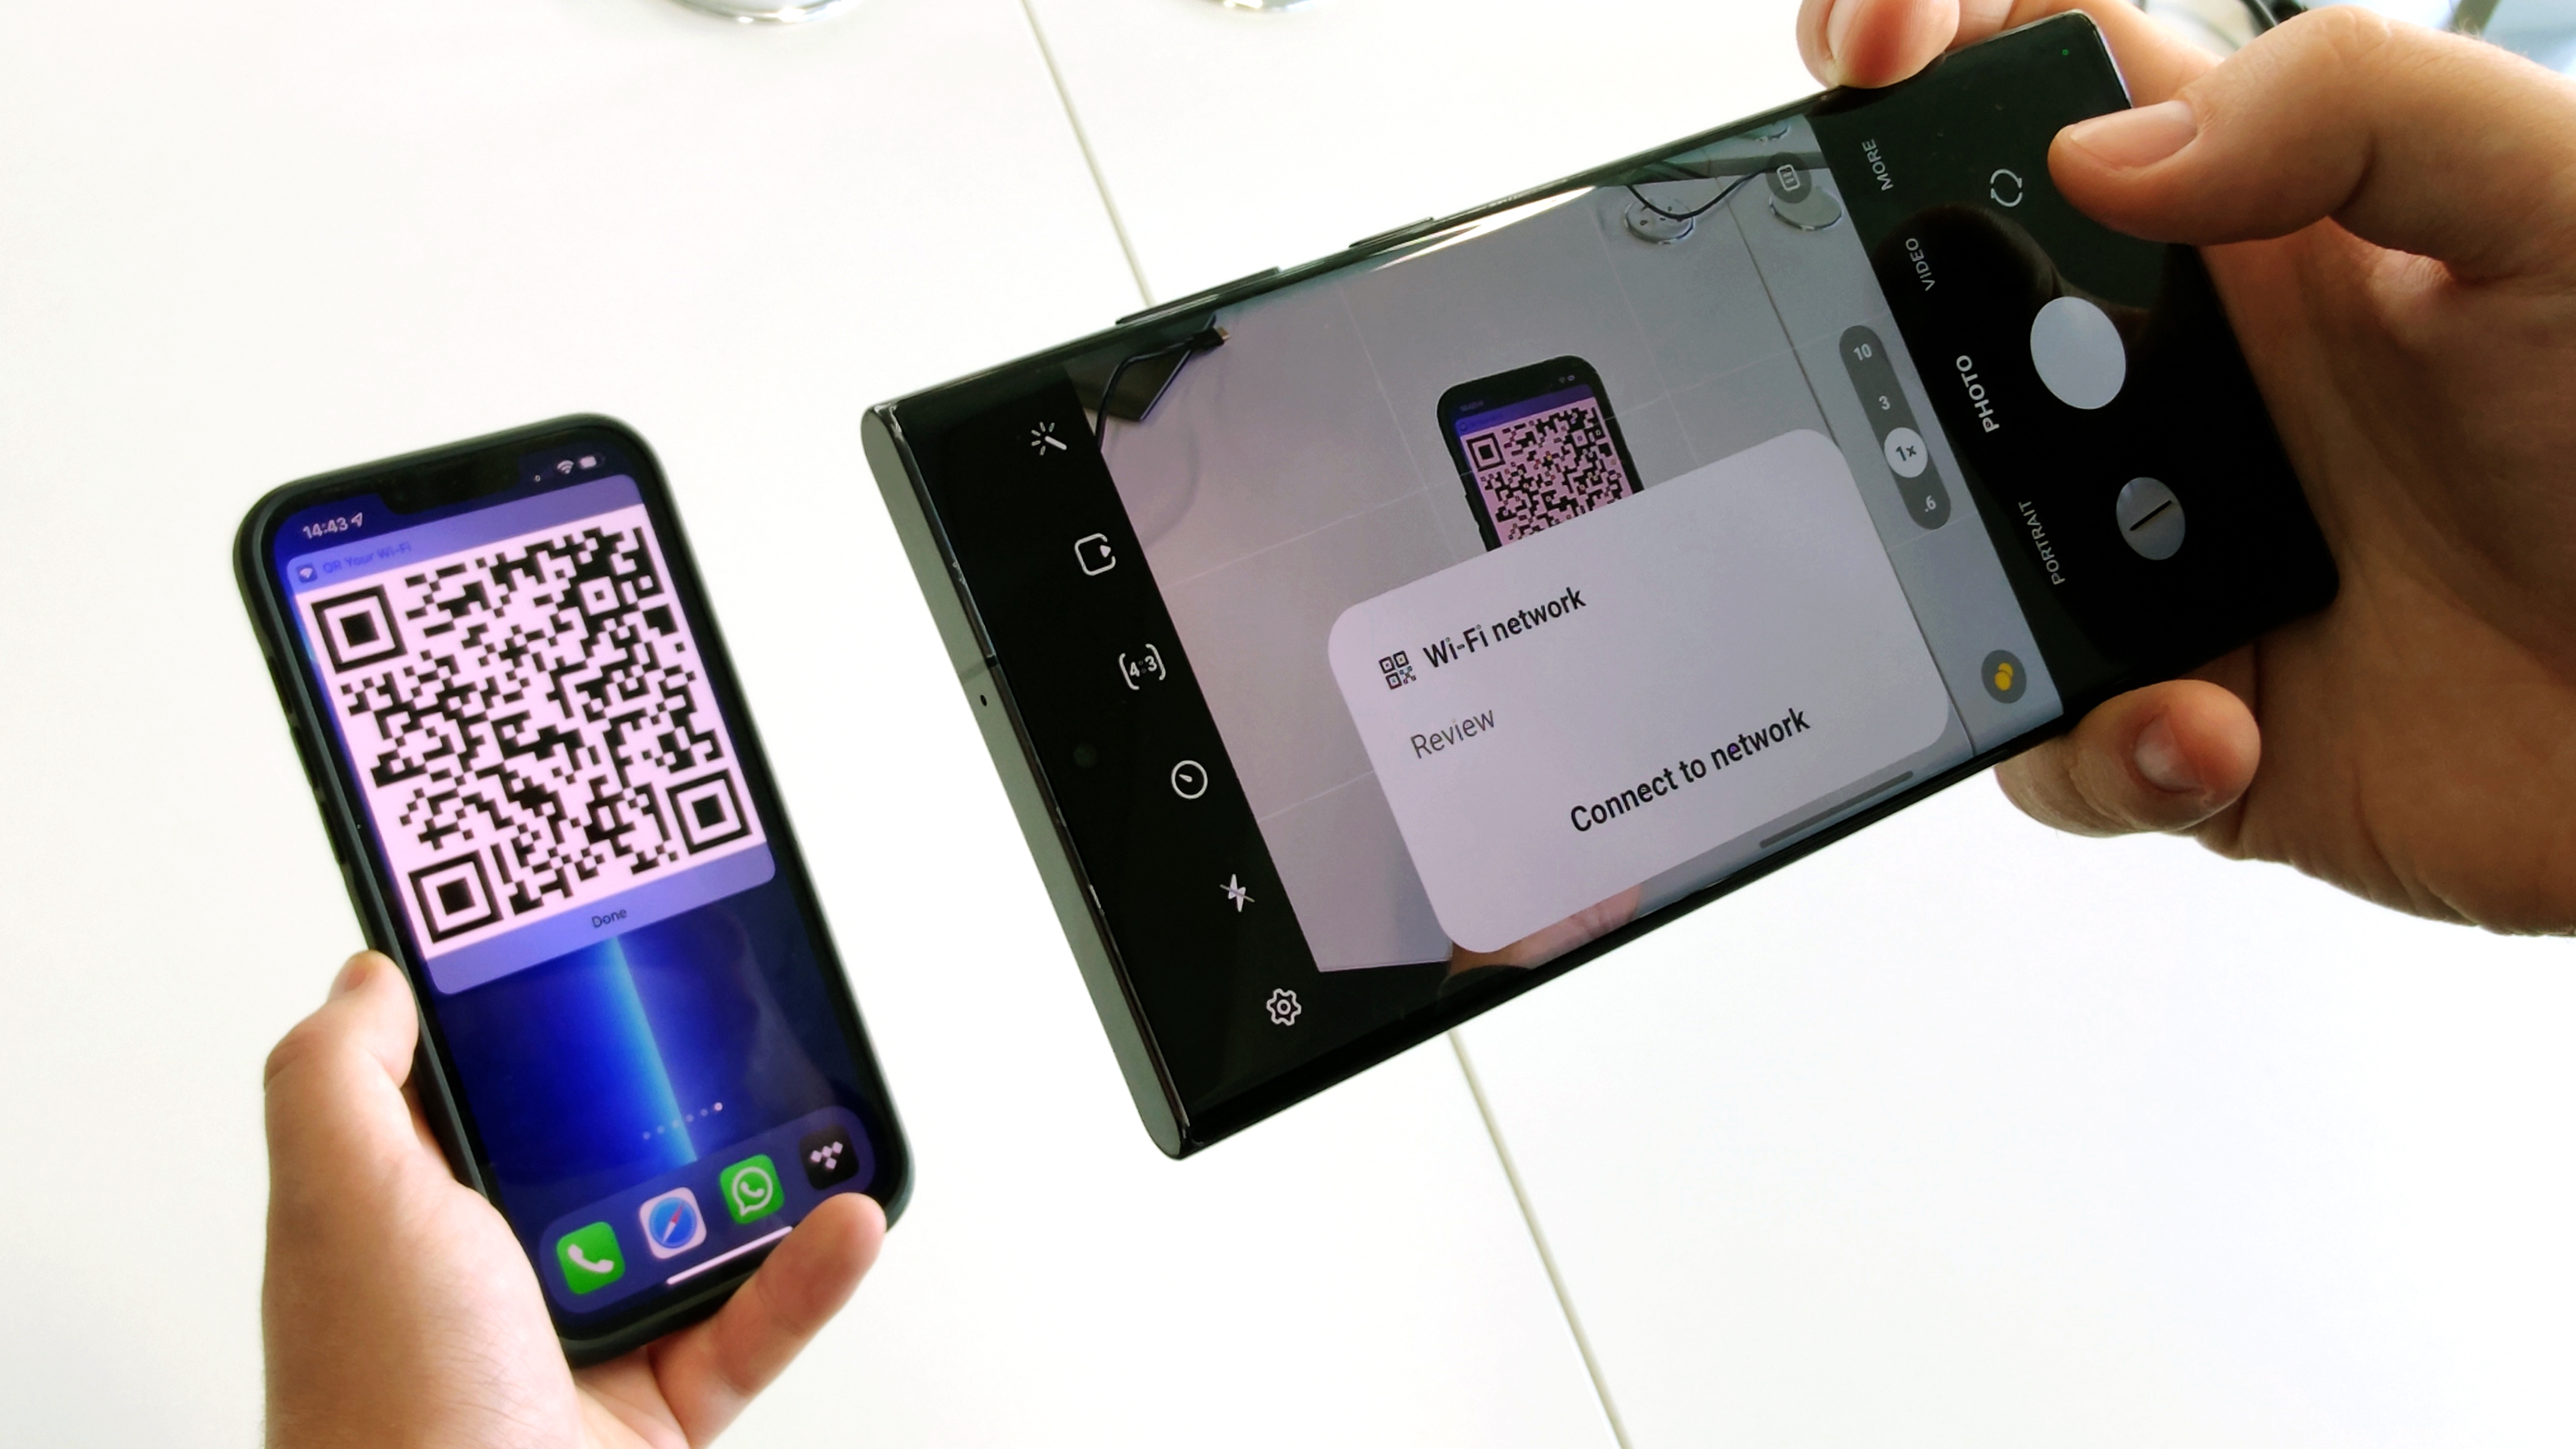 A Samsung Galaxy S22 Ultra scanning a Wi-Fi QR code from an iPhone 13 Pro Max, representing an article about how to share a wi-fi password from iPhone to Android